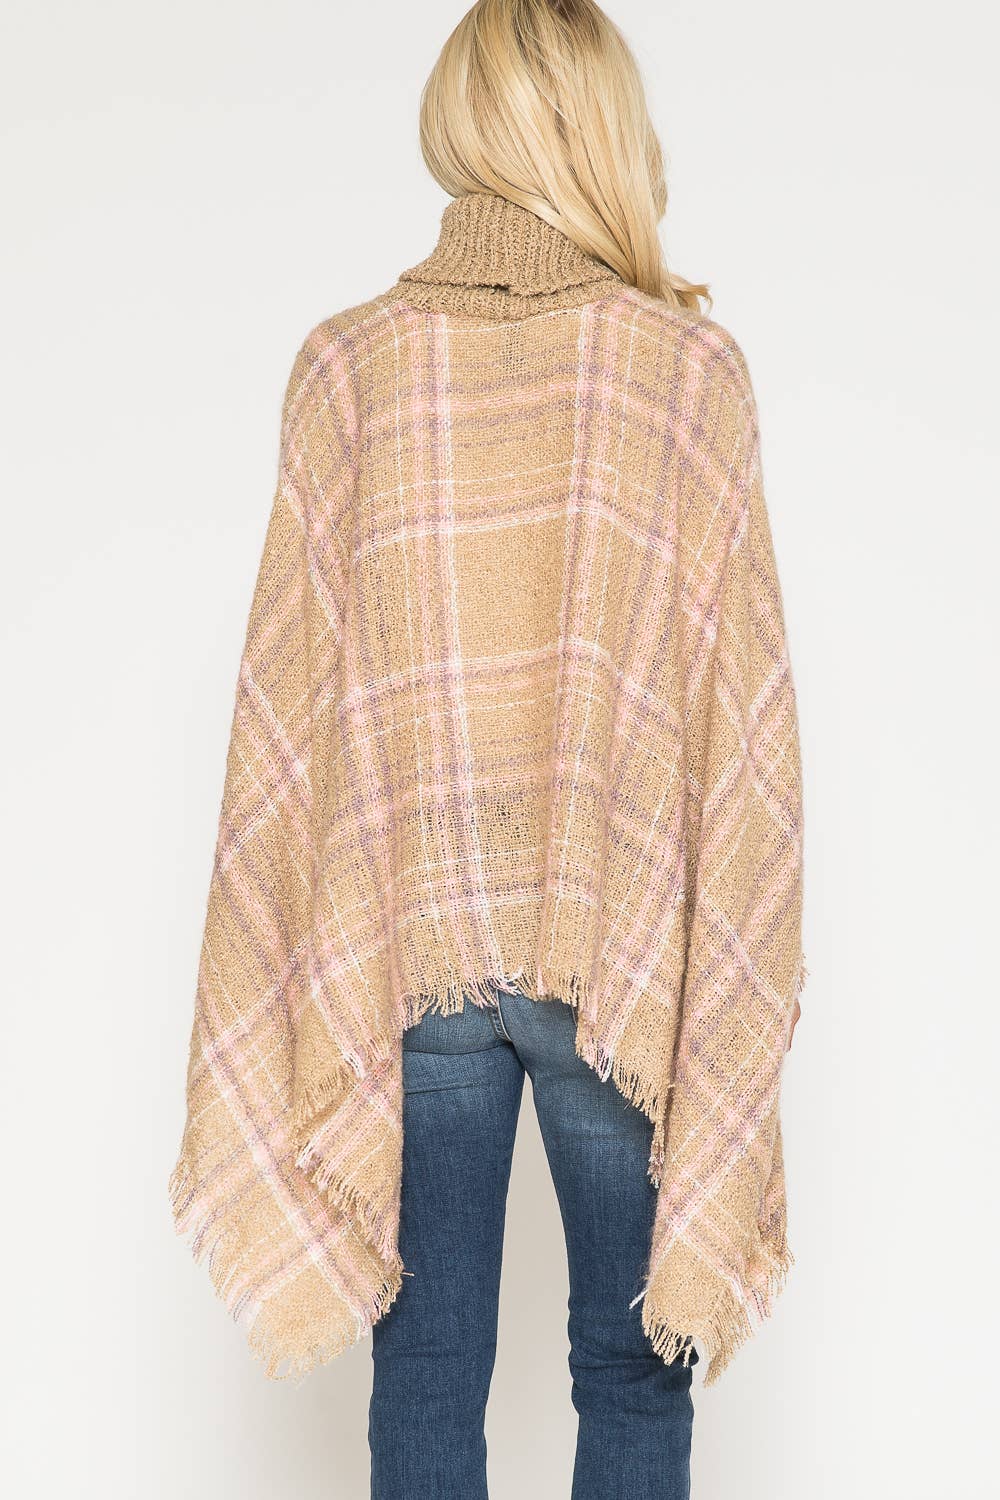 Knit Poncho Coverup